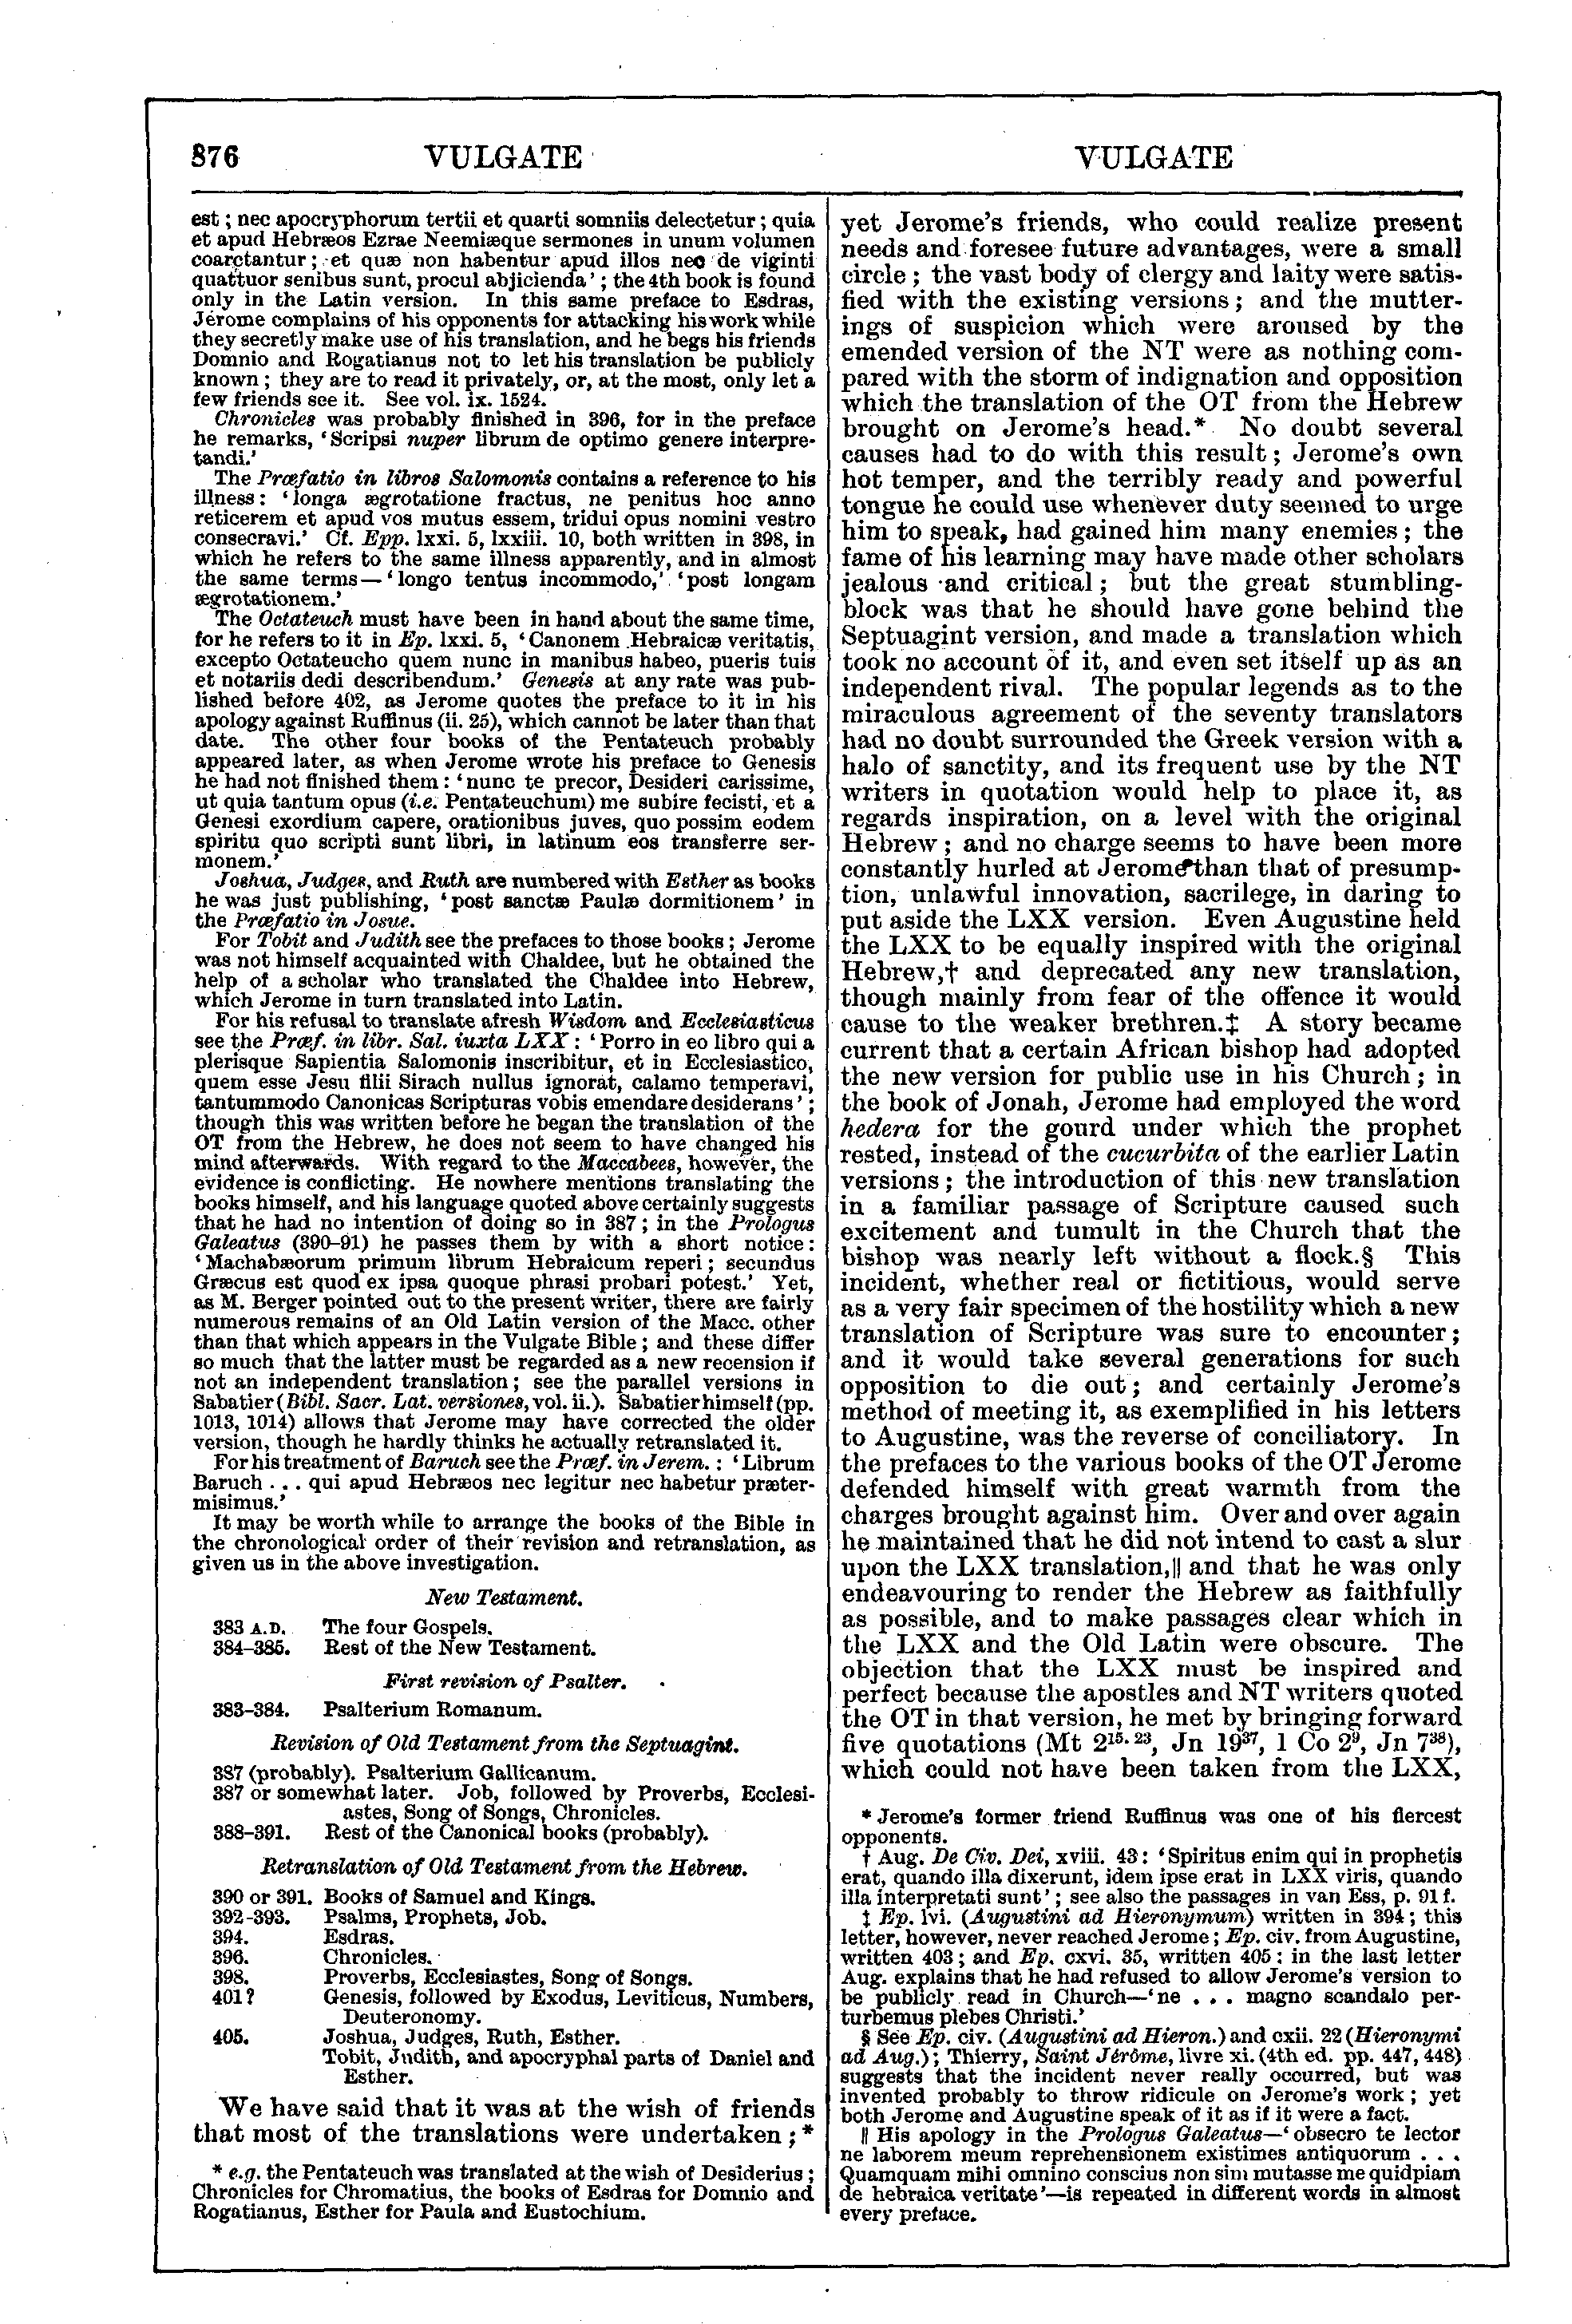 Image of page 876